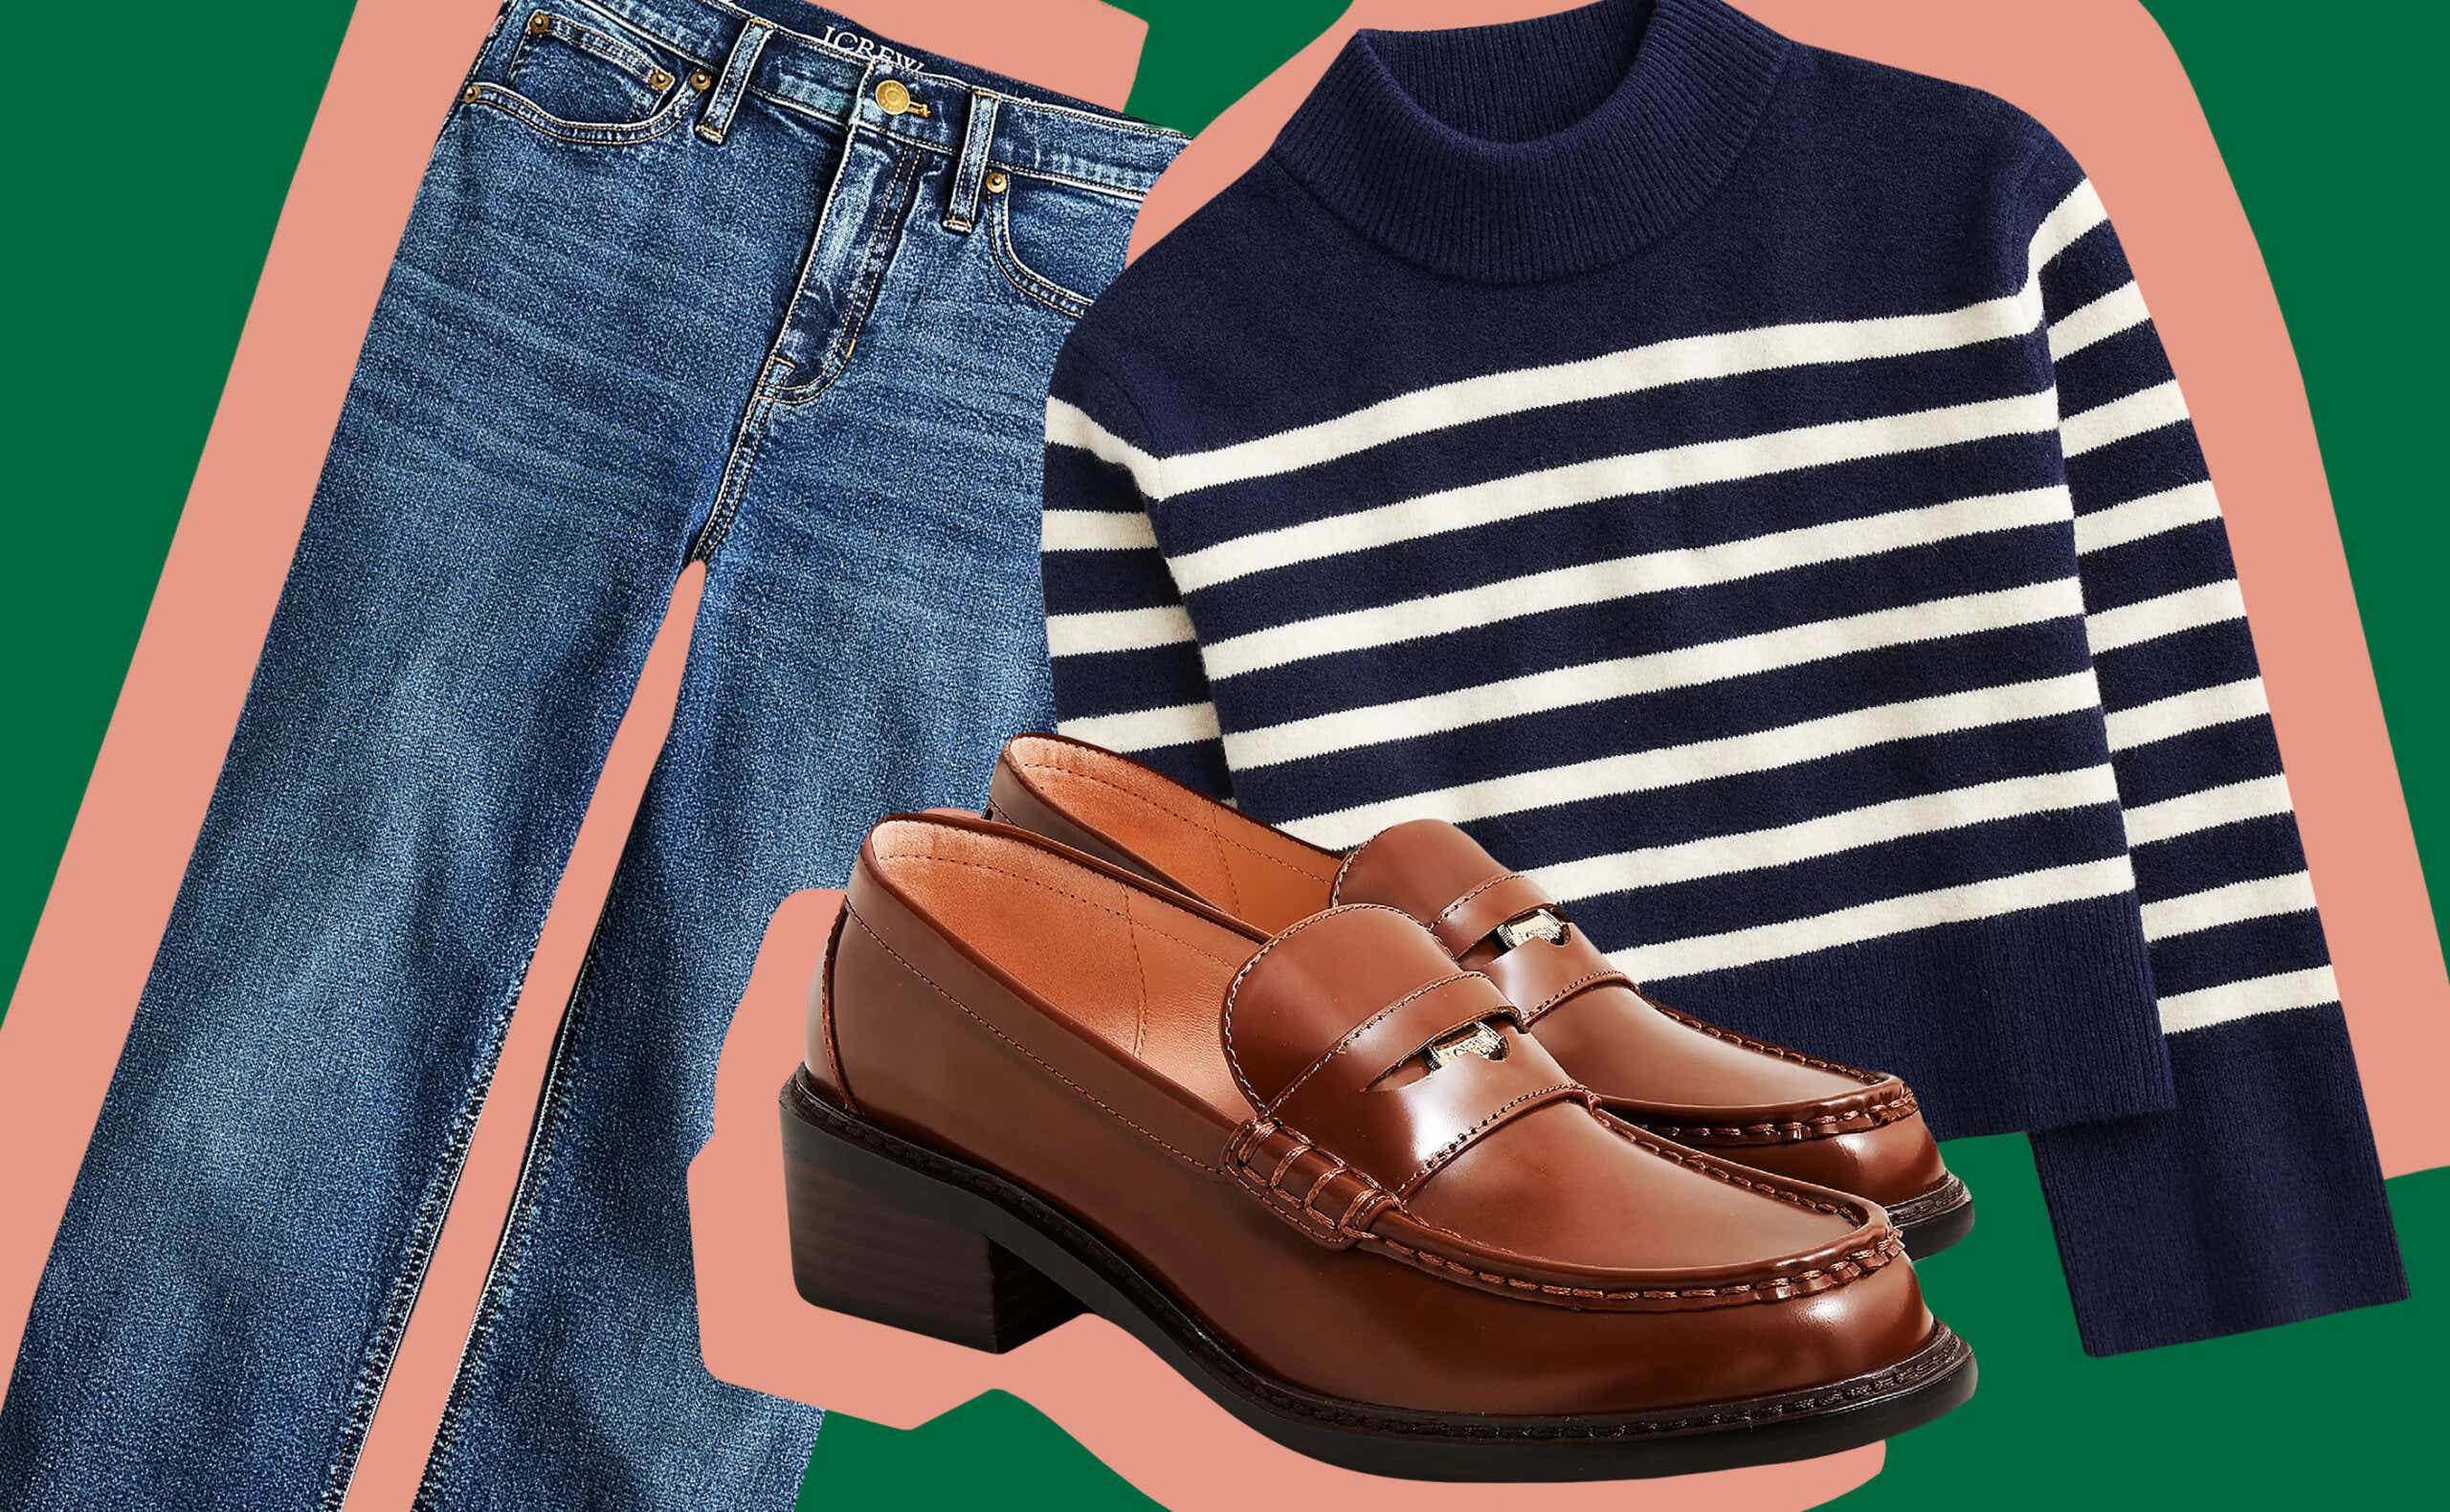 jeans loafers and striped sweater on background